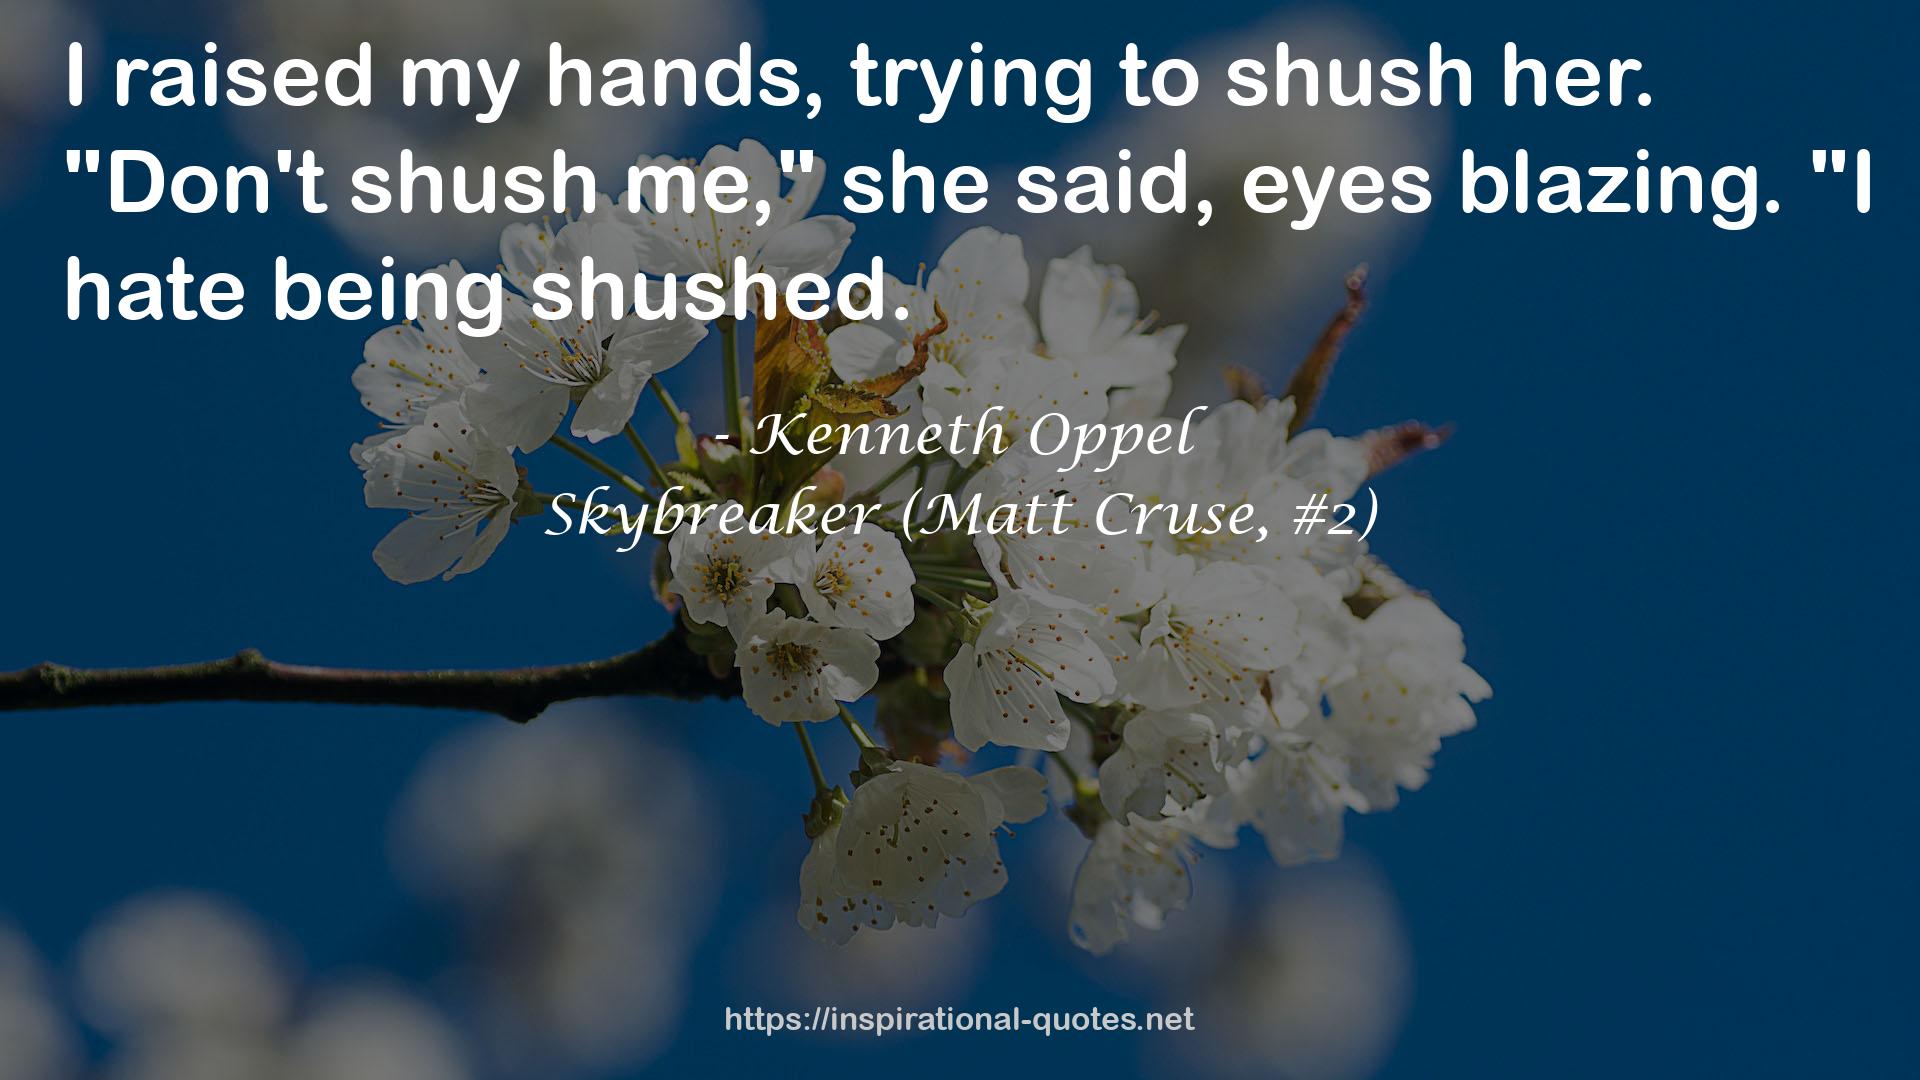 Kenneth Oppel QUOTES